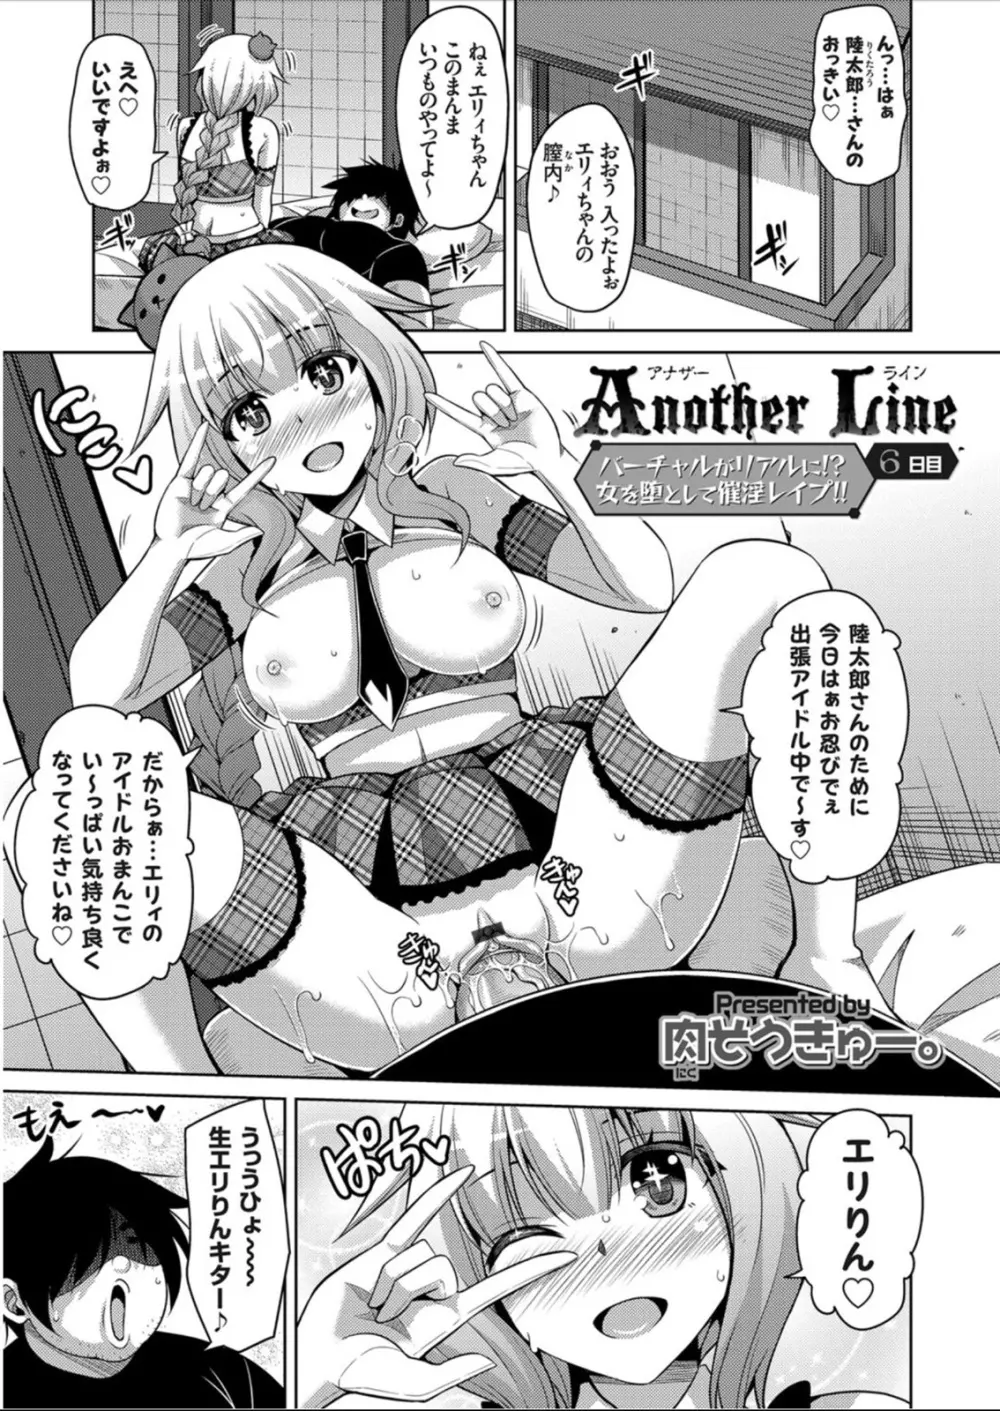 Another Line 〜バーチャルがリアルに！？女を堕として催淫レイプ！！〜 第1-8話 Page.91